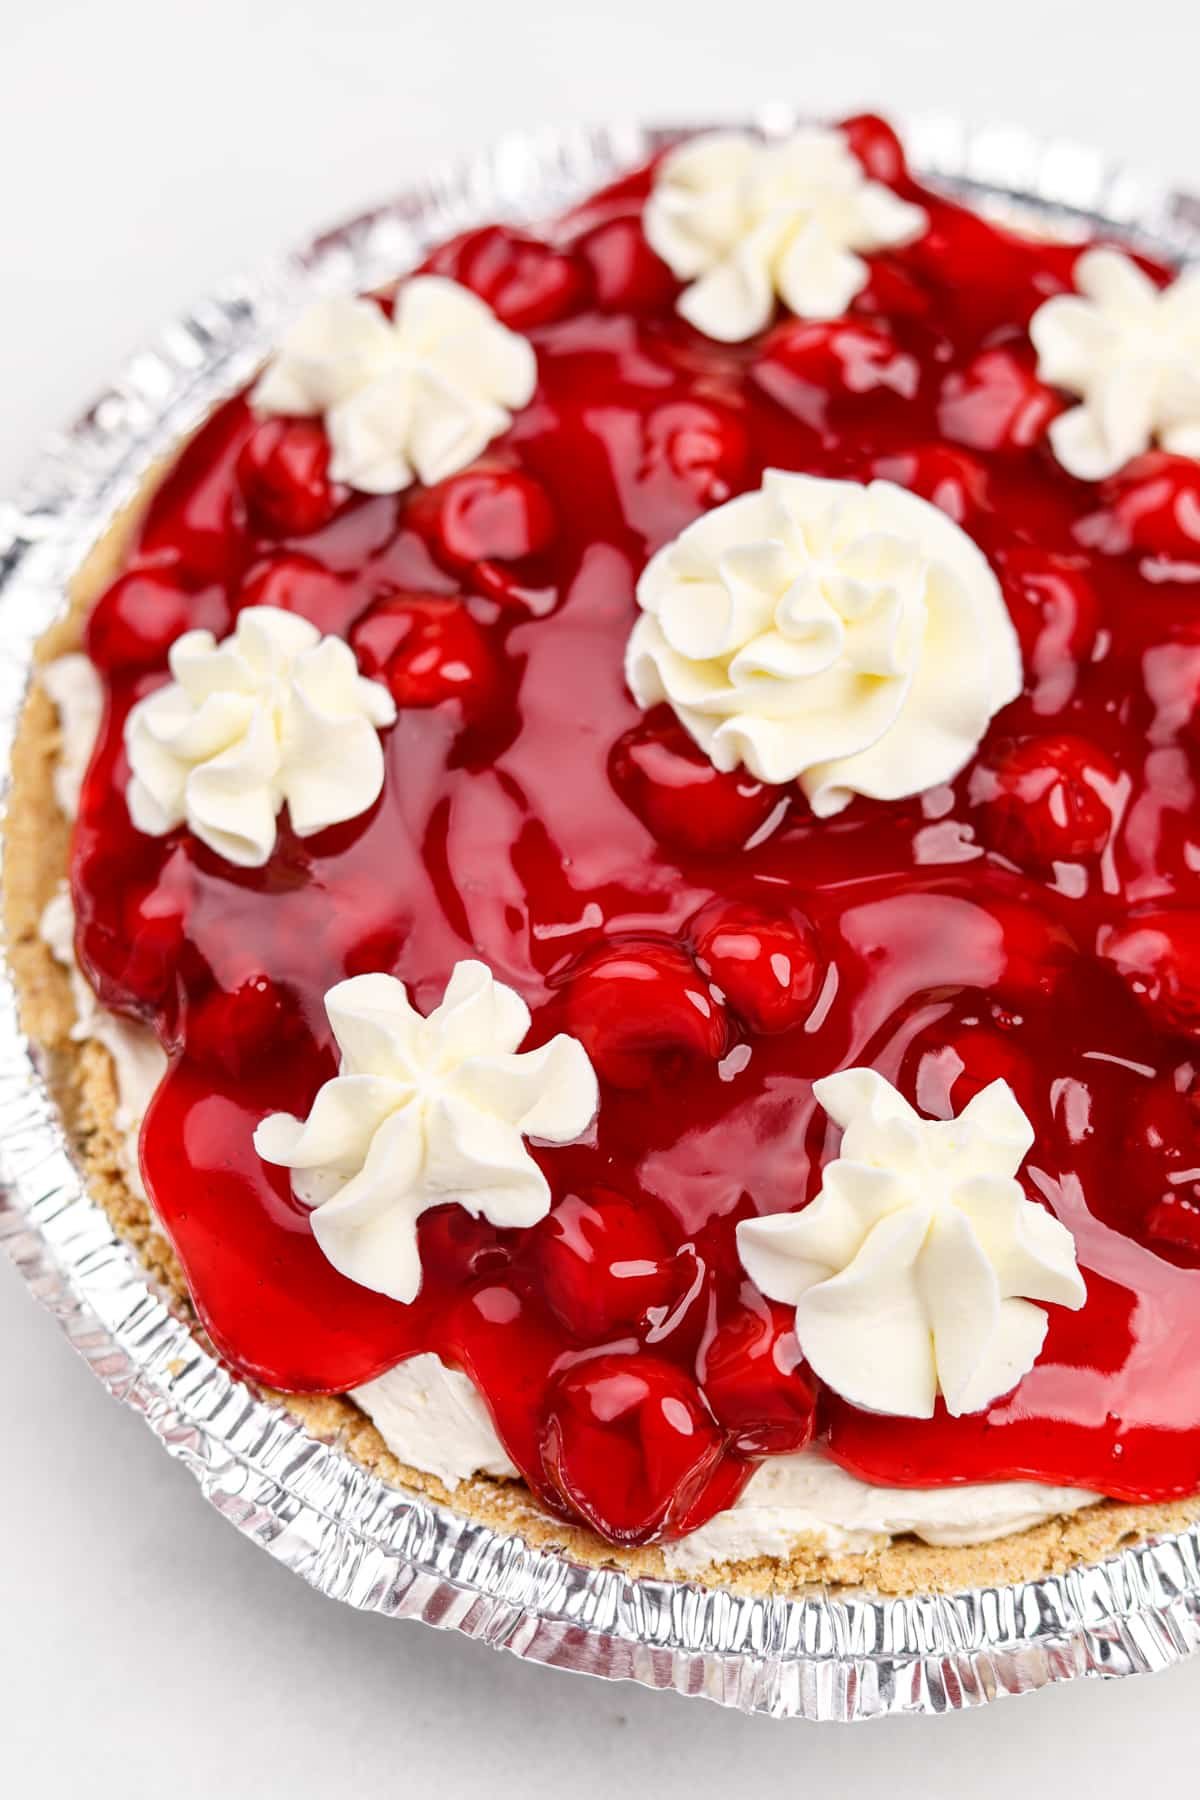 A cherry cheesecake topped with dollops of whipped cream.